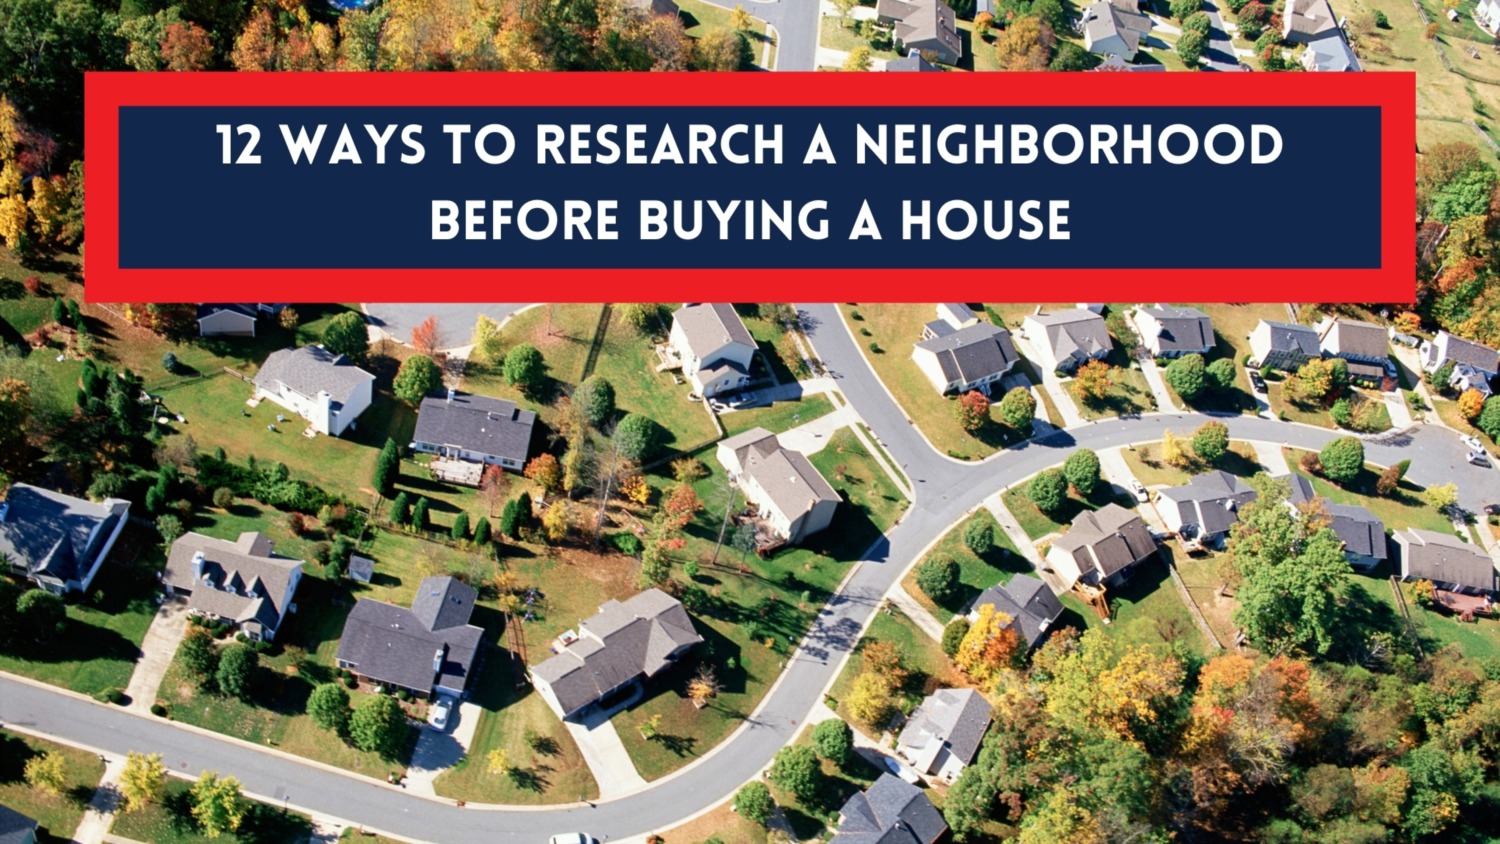 12 Ways to Research a Neighborhood Before Buying a House